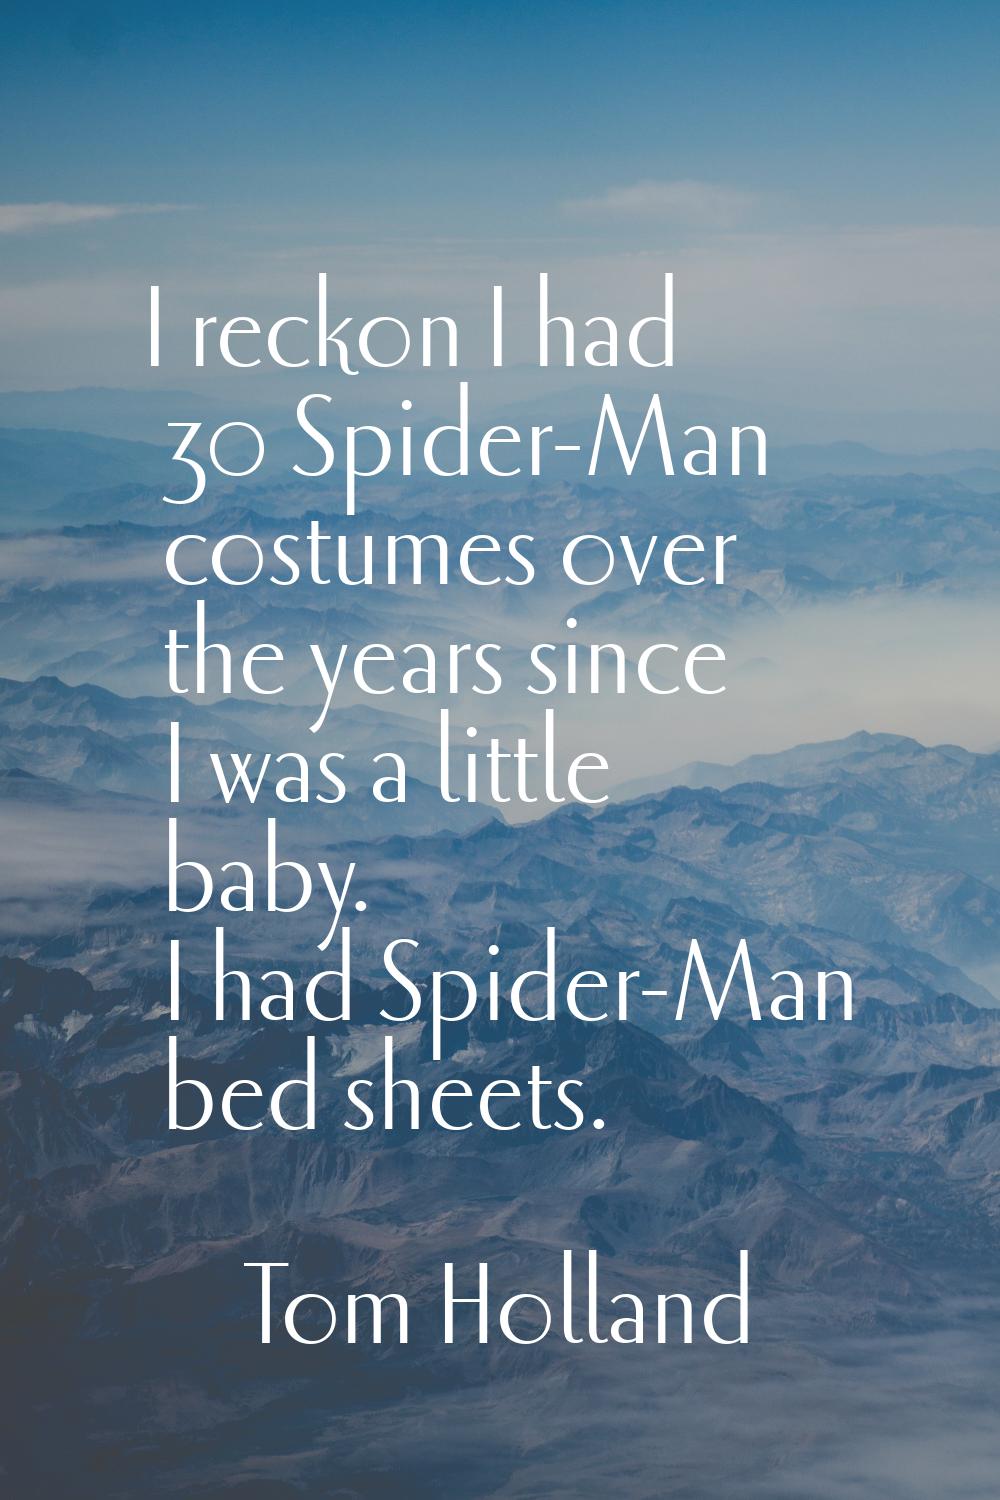 I reckon I had 30 Spider-Man costumes over the years since I was a little baby. I had Spider-Man be